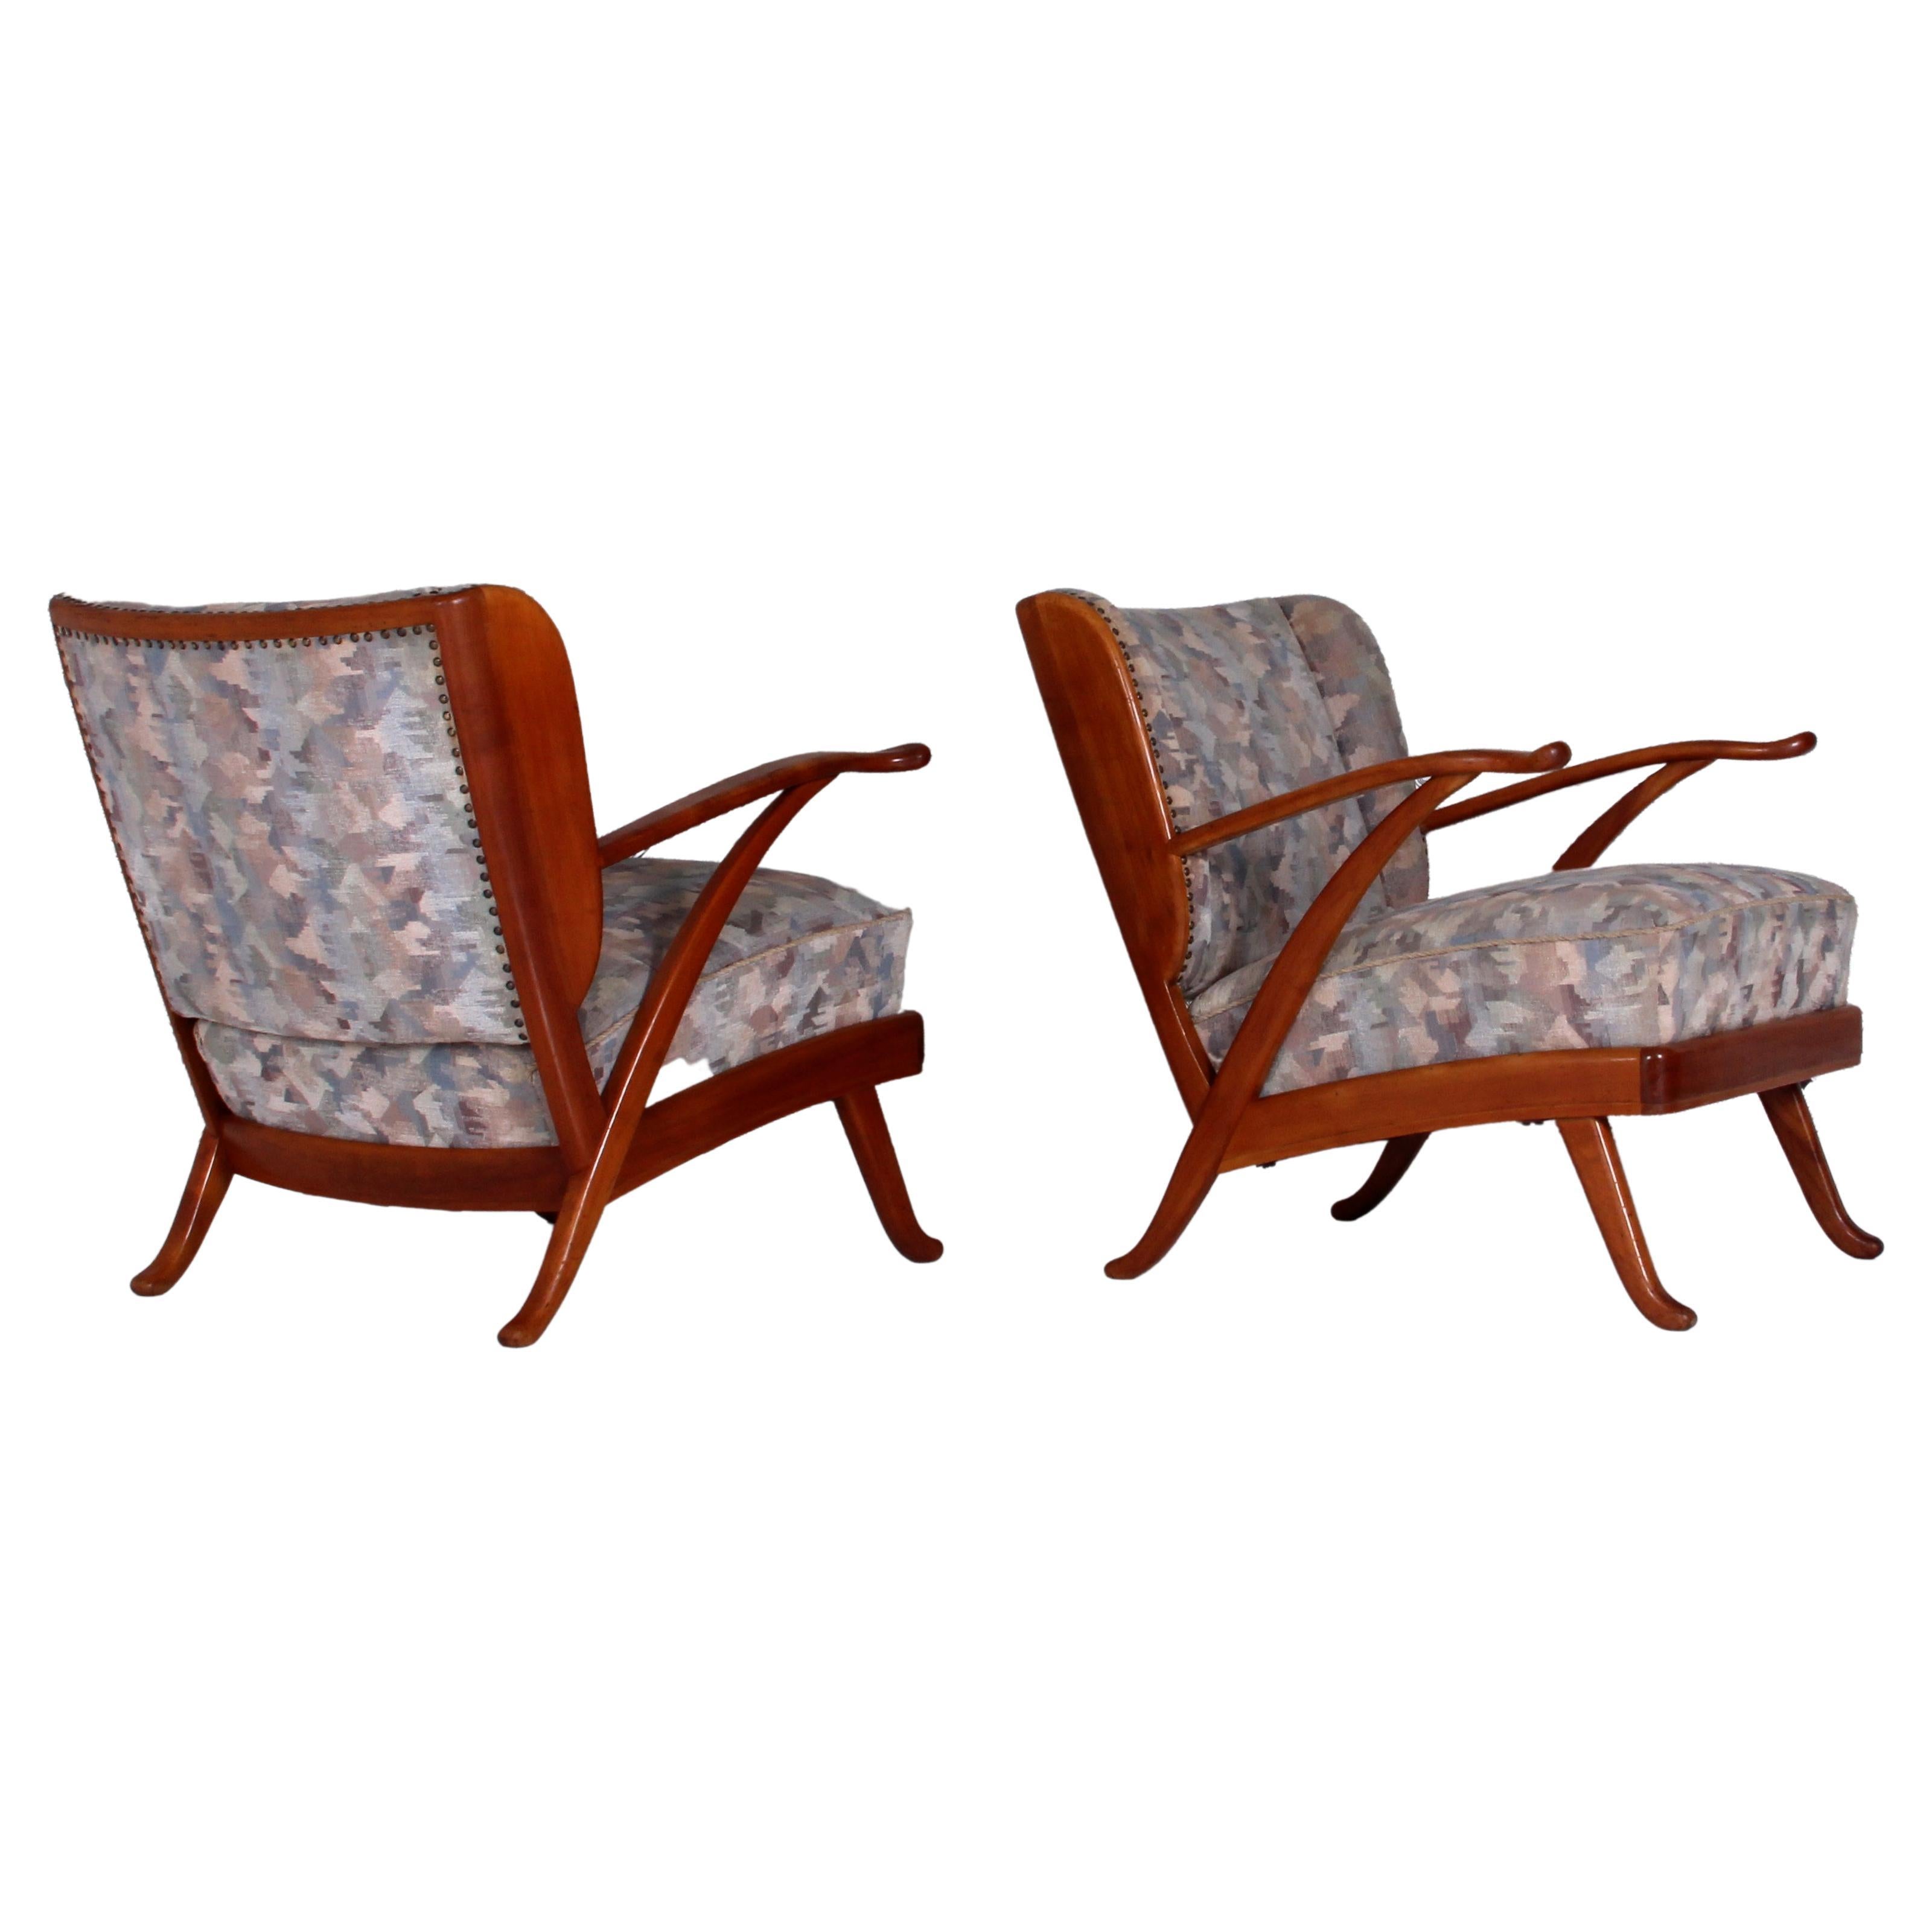 Karl Nothhelfer très rare SET of 2 Wingback Armchairs & Sofa 1950s solid Cherry 